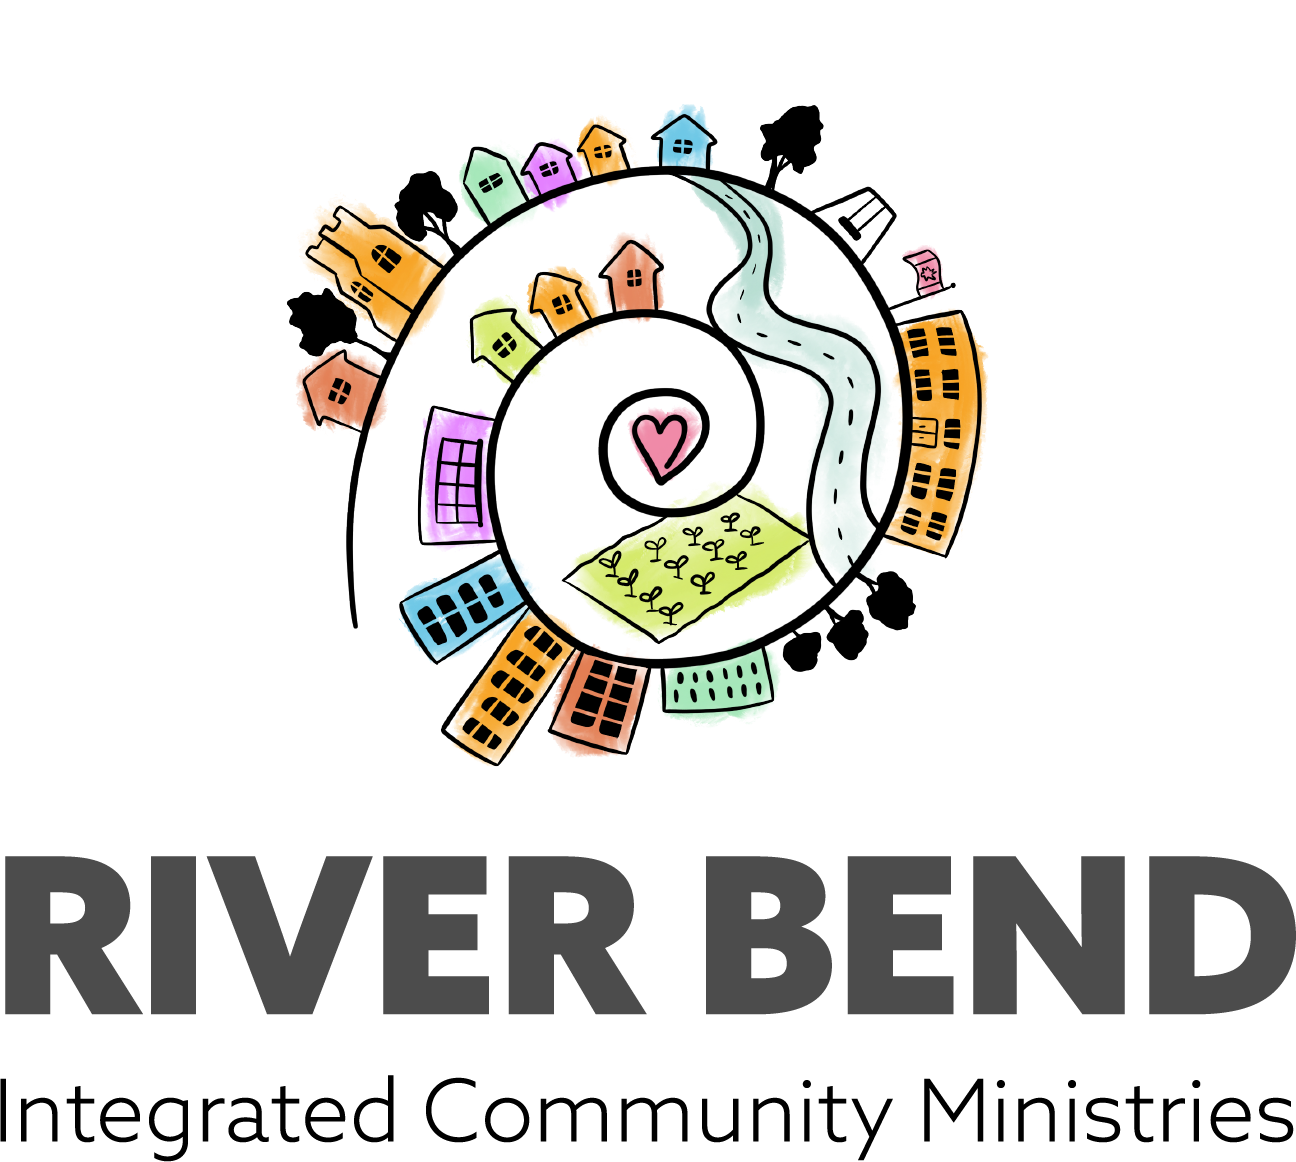 A spiral of buildings and people, with a heart at the centre, and the words "River Bend Integrated Community Ministries".